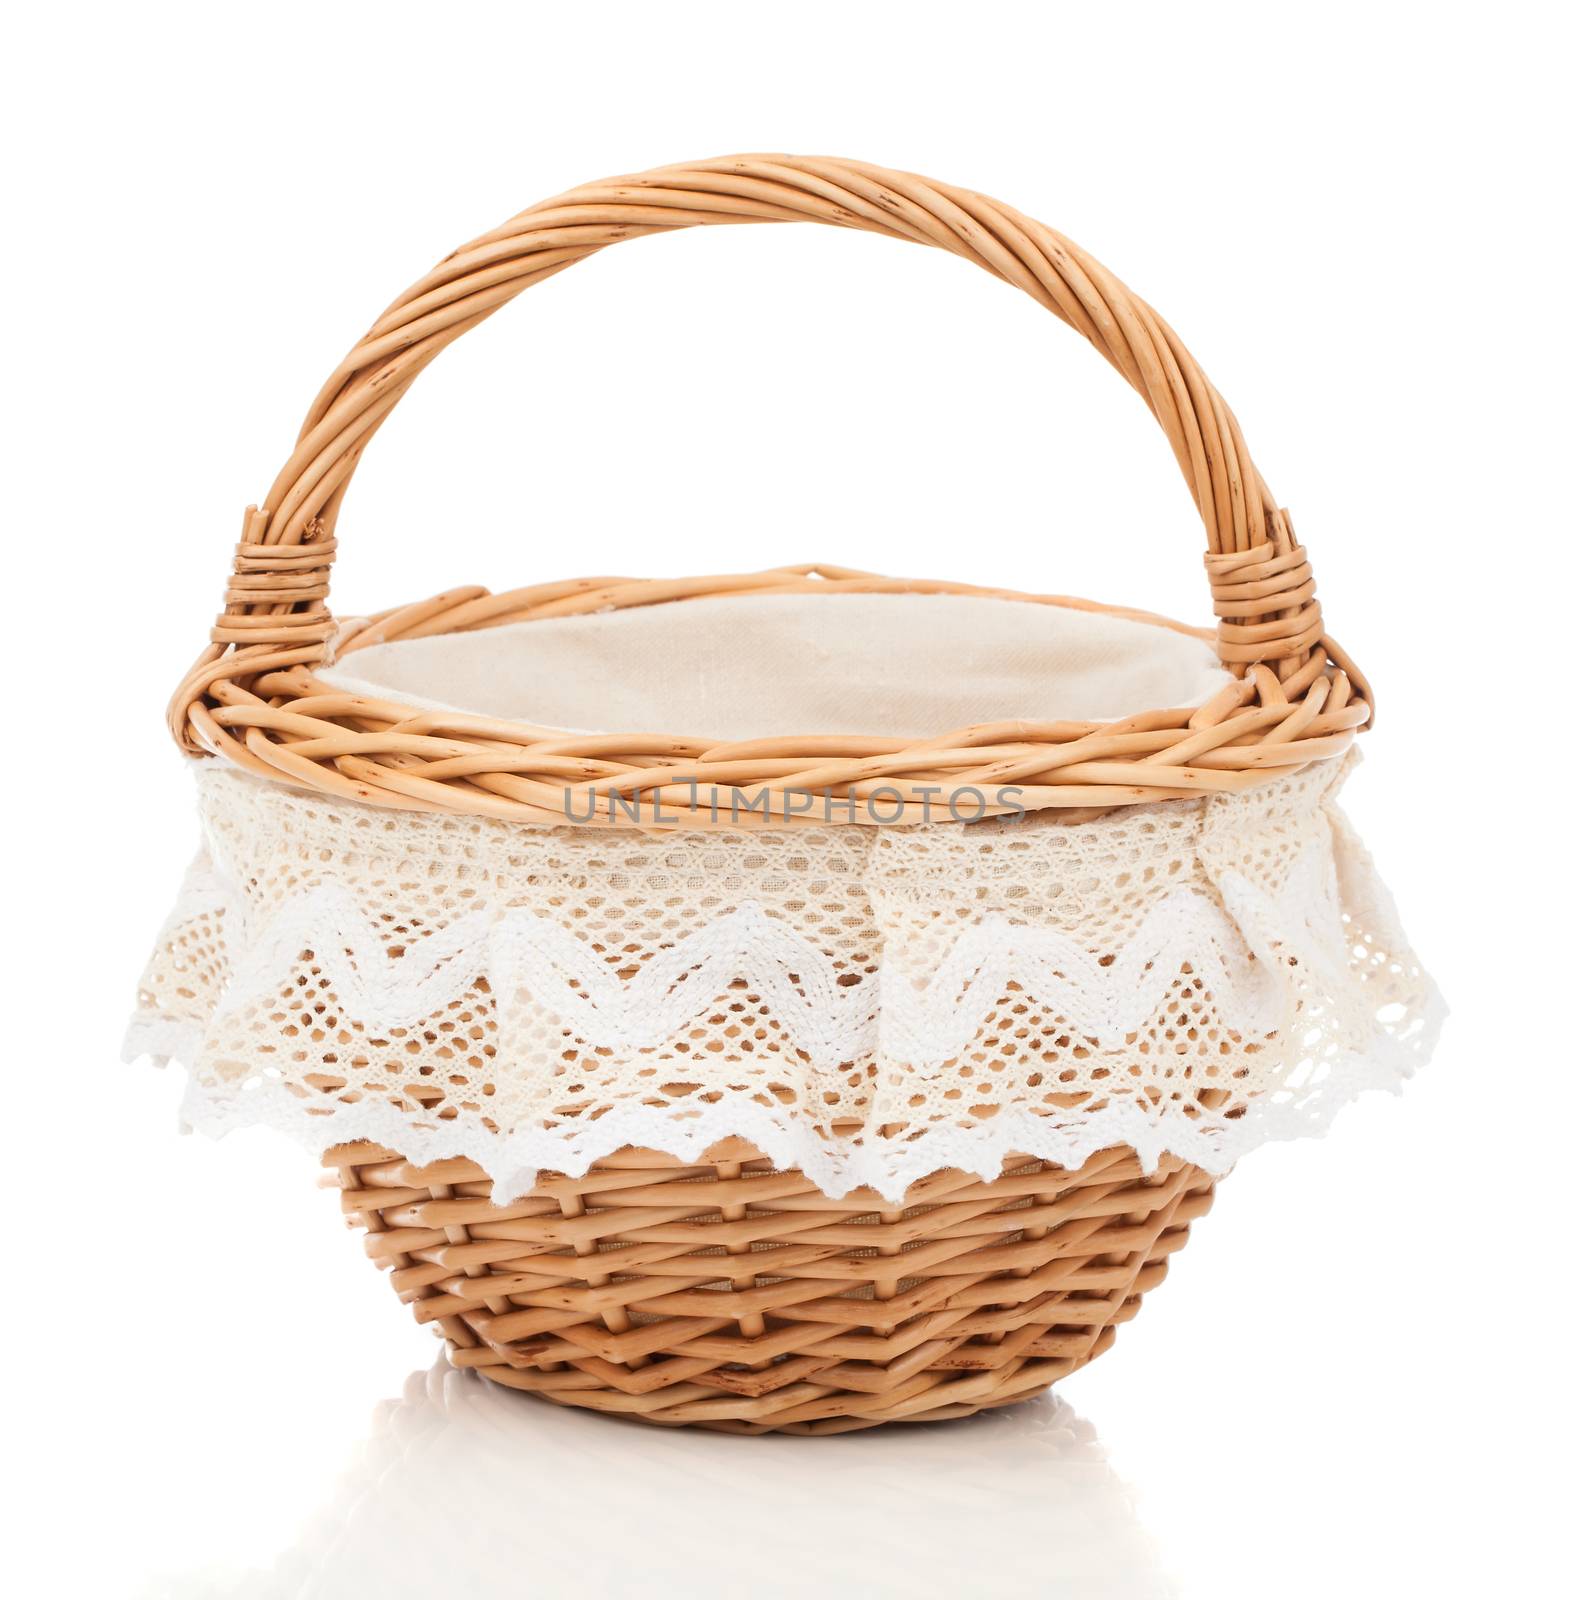 Brown small wicker basket isolated over the white background by motorolka